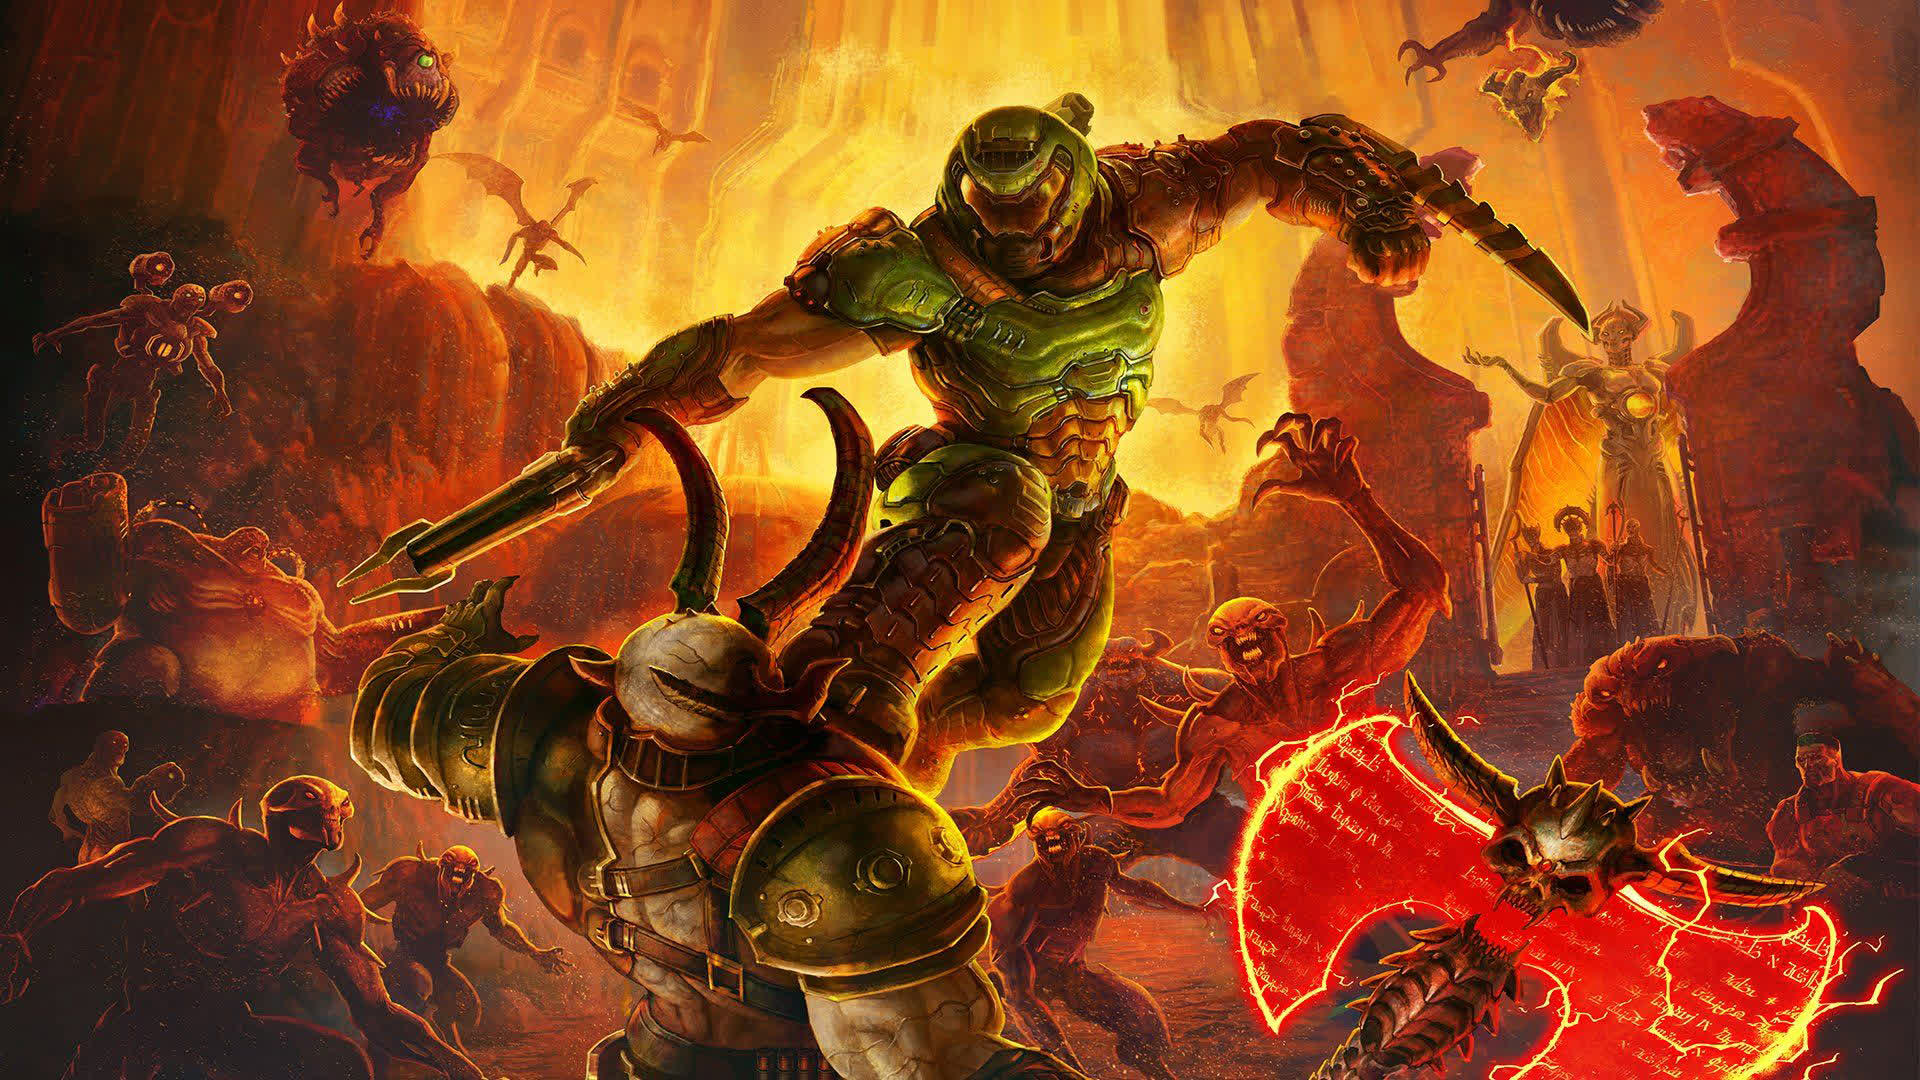 QuakeCon special: Doom and Quake bundles are up to 75 percent off for a limited time